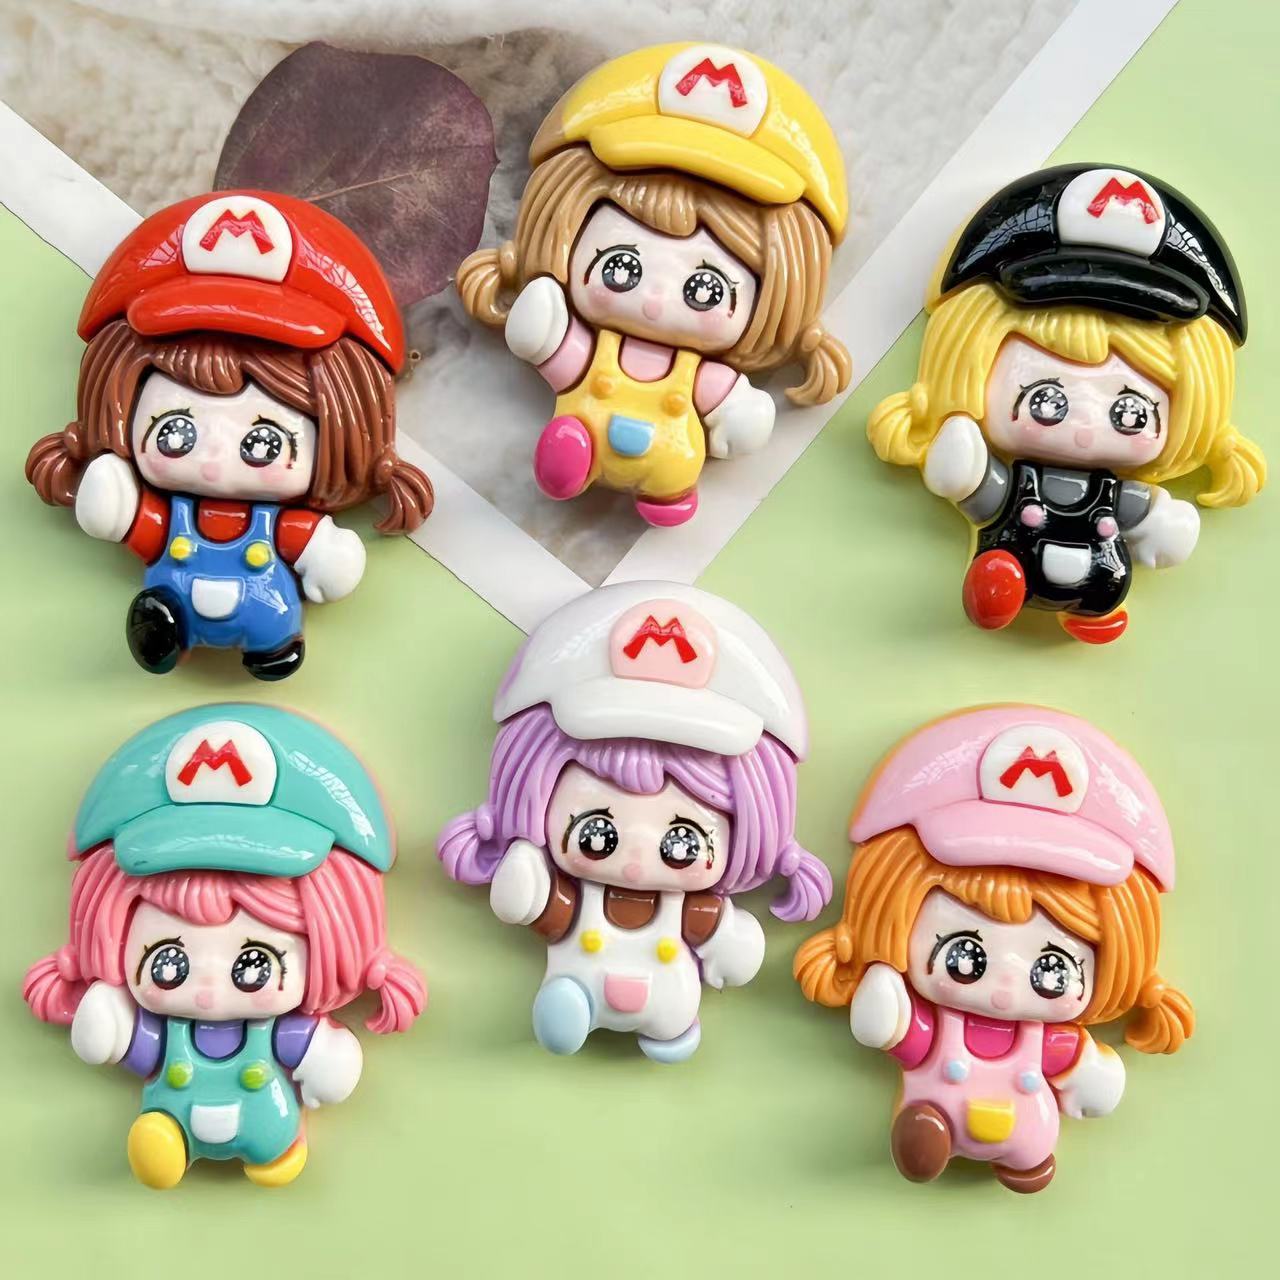 A0680 Mario girls-large size（pre-sale）